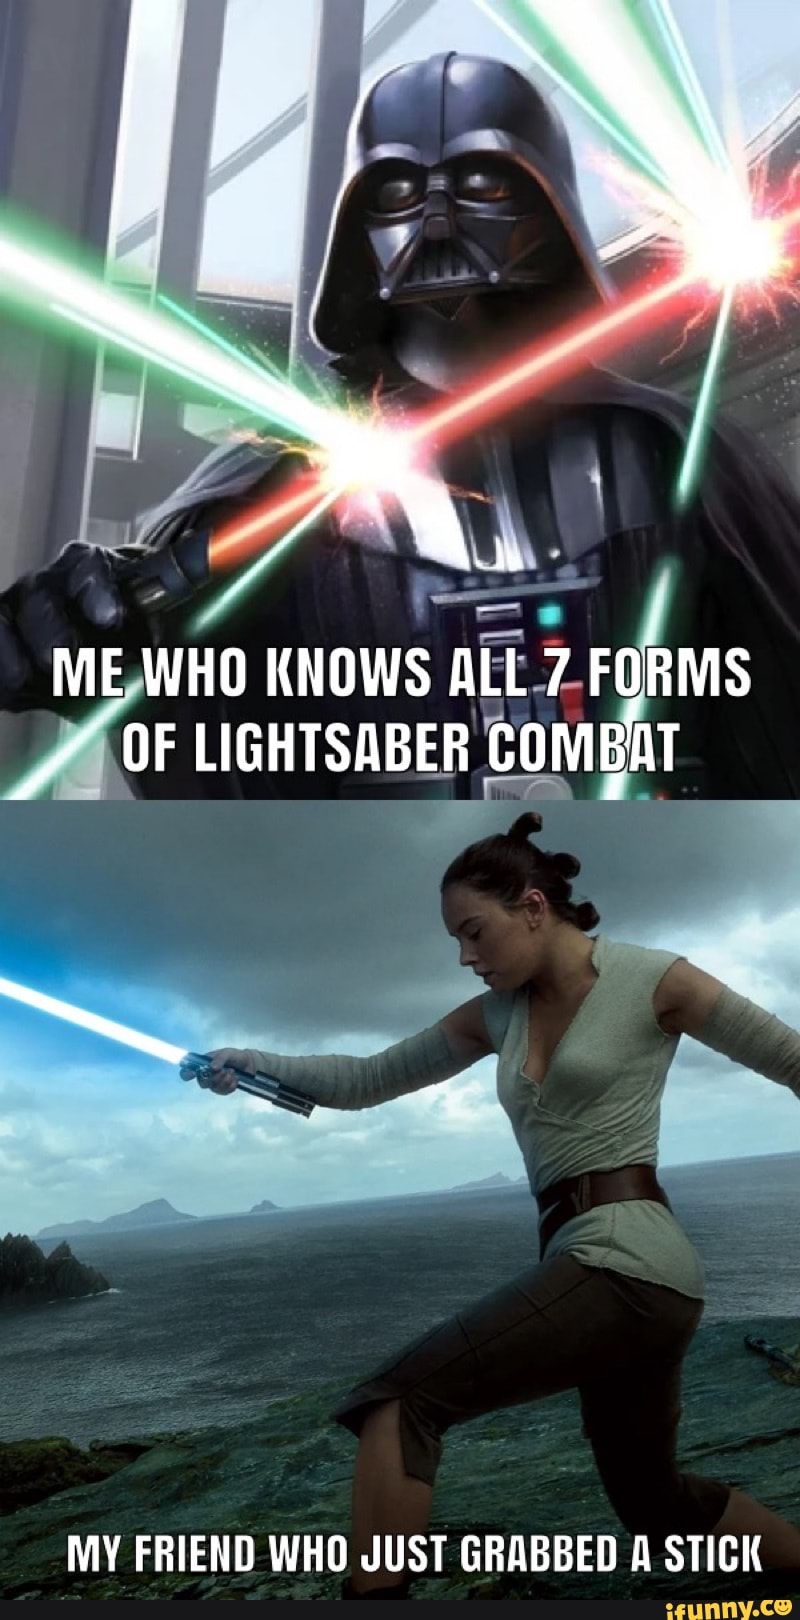 me-who-knows-all-7-forms-of-lightsaber-combat-my-friend-who-just